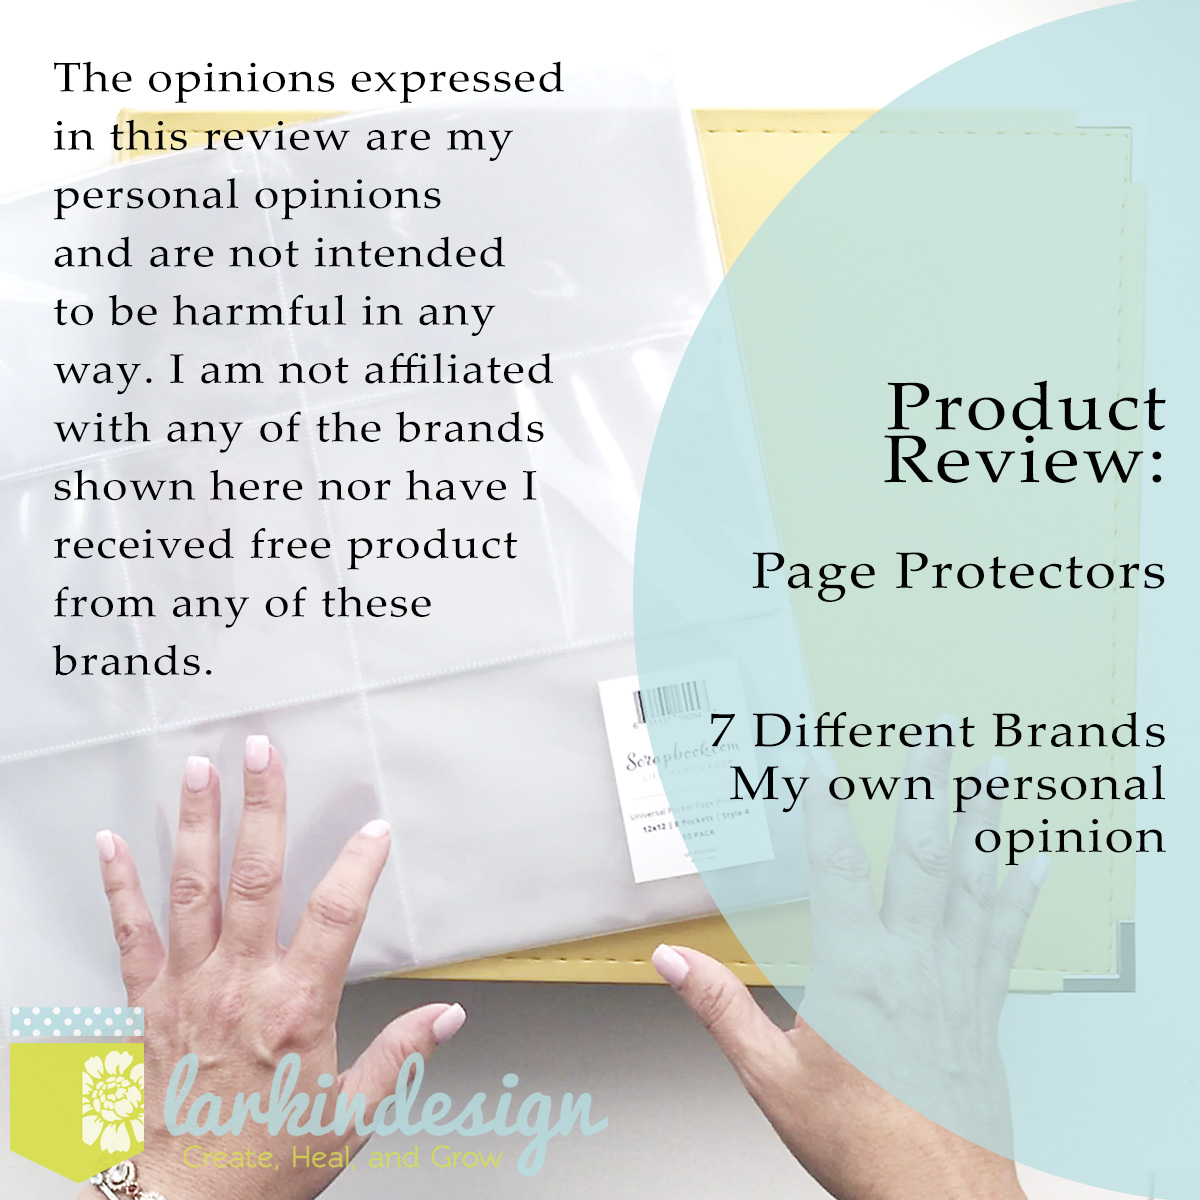 Larkindesign Scrapbook and Project Life Page Protector Comparison and Review | Seven Brands!!!!